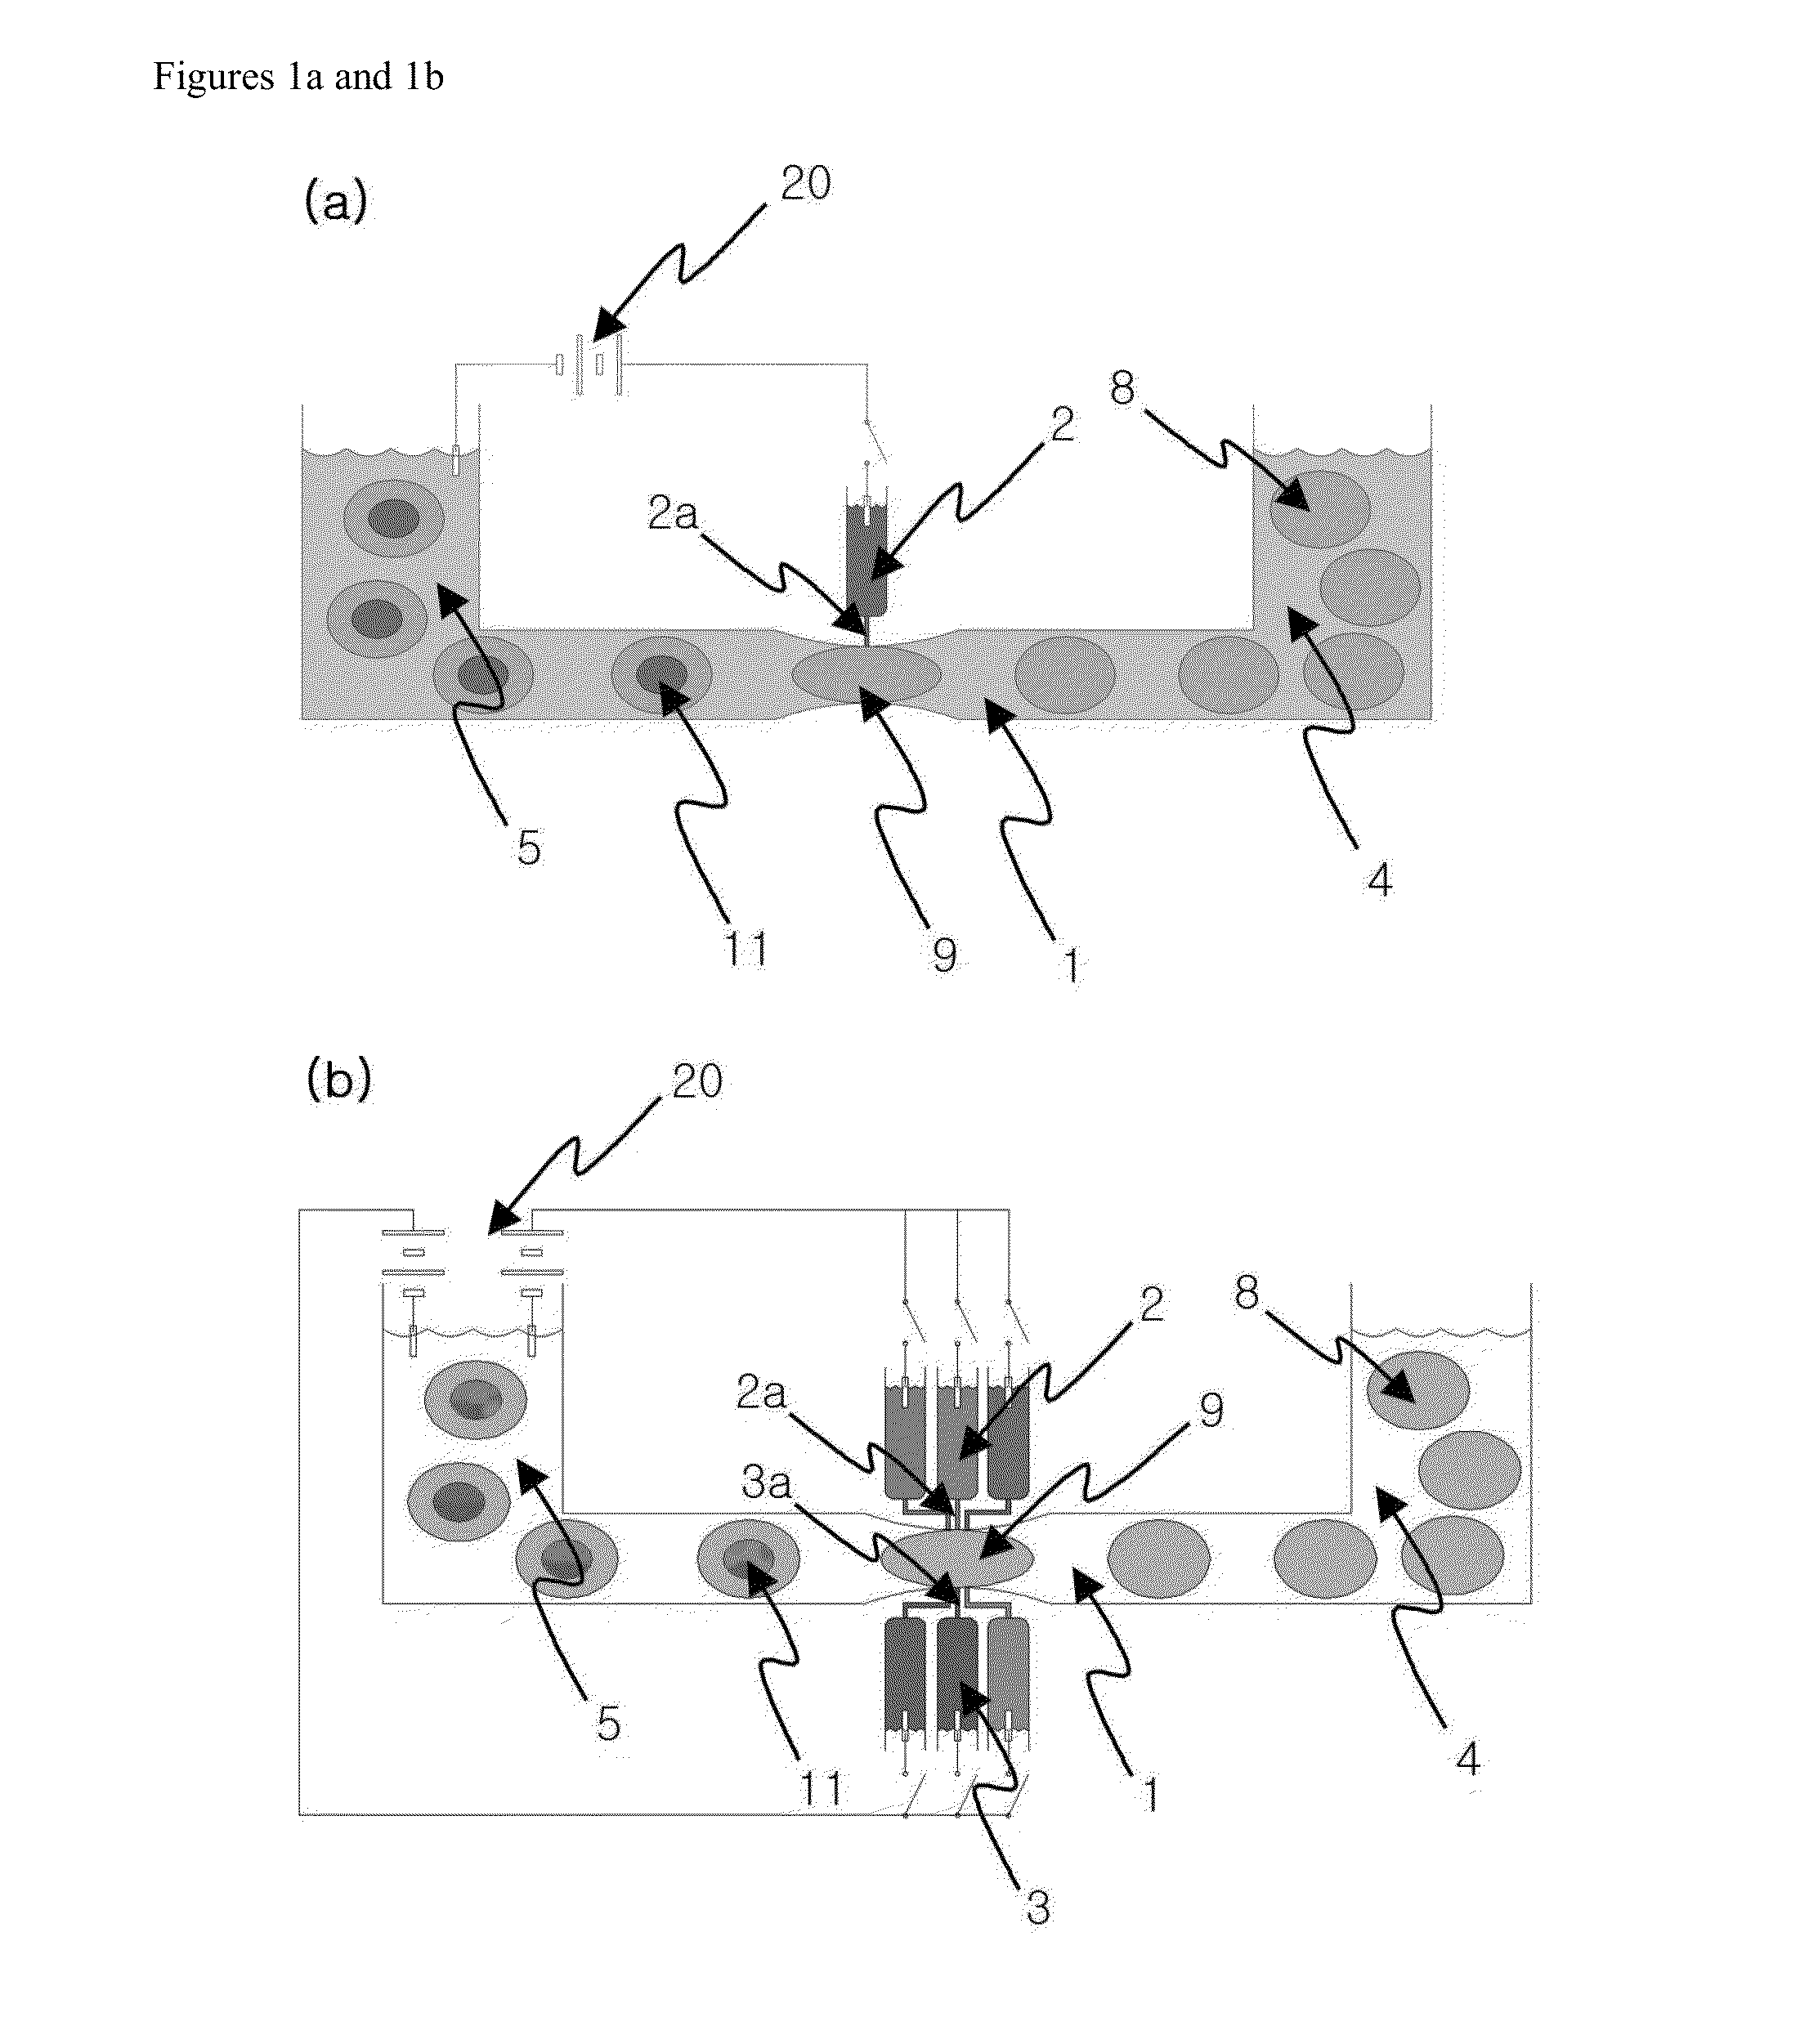 Process for modifying a cell by putting material into the cell